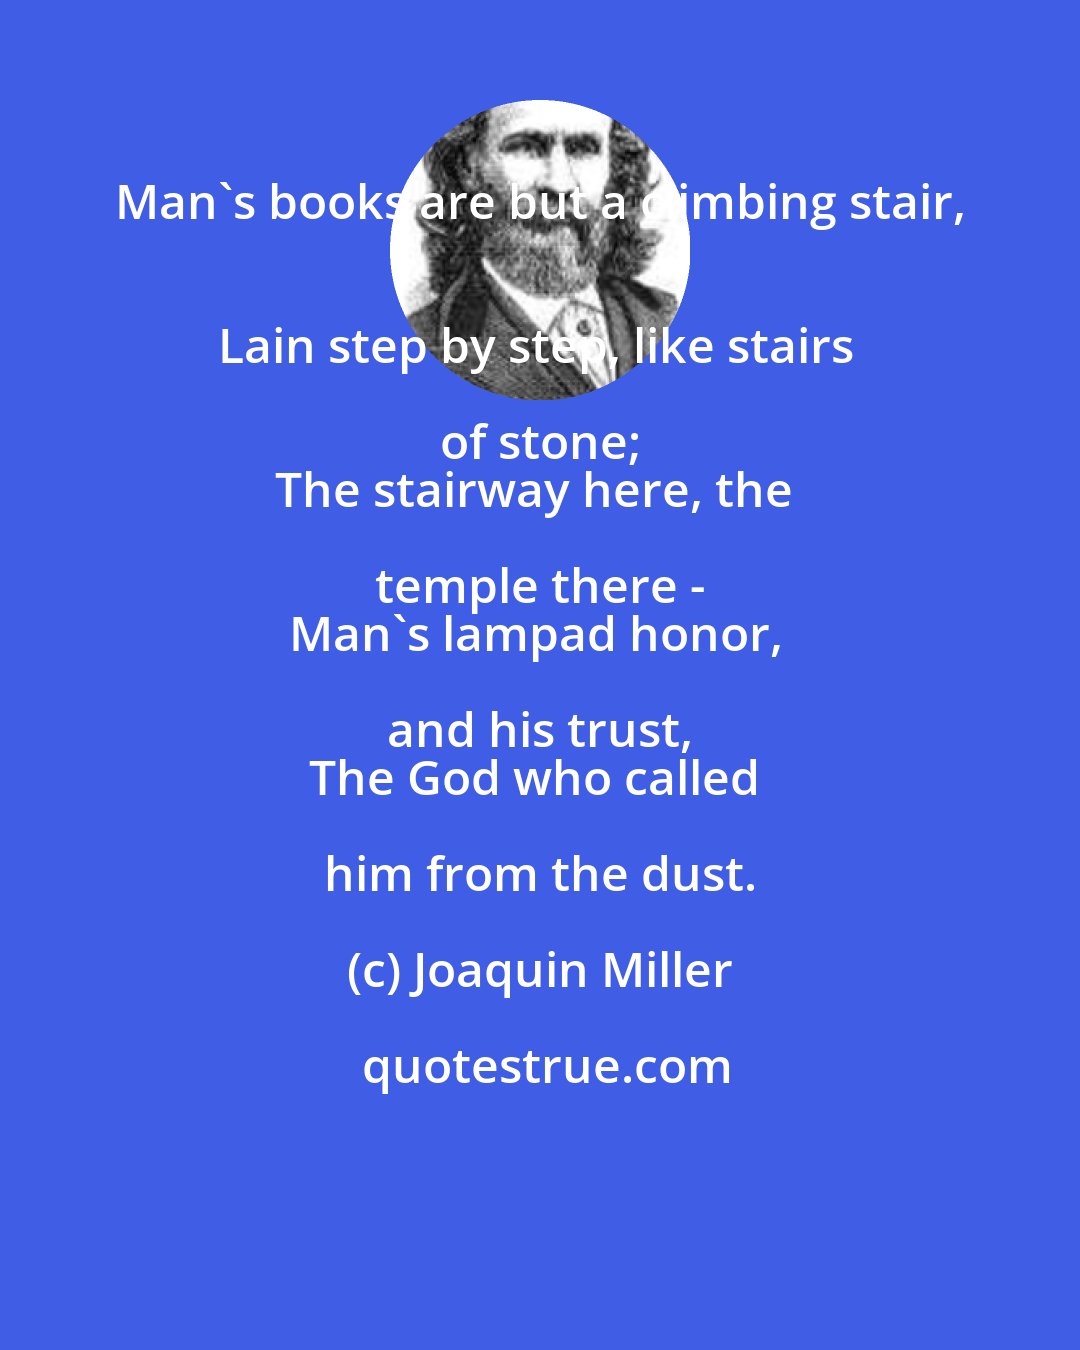 Joaquin Miller: Man's books are but a climbing stair, 
Lain step by step, like stairs of stone; 
The stairway here, the temple there - 
Man's lampad honor, and his trust, 
The God who called him from the dust.